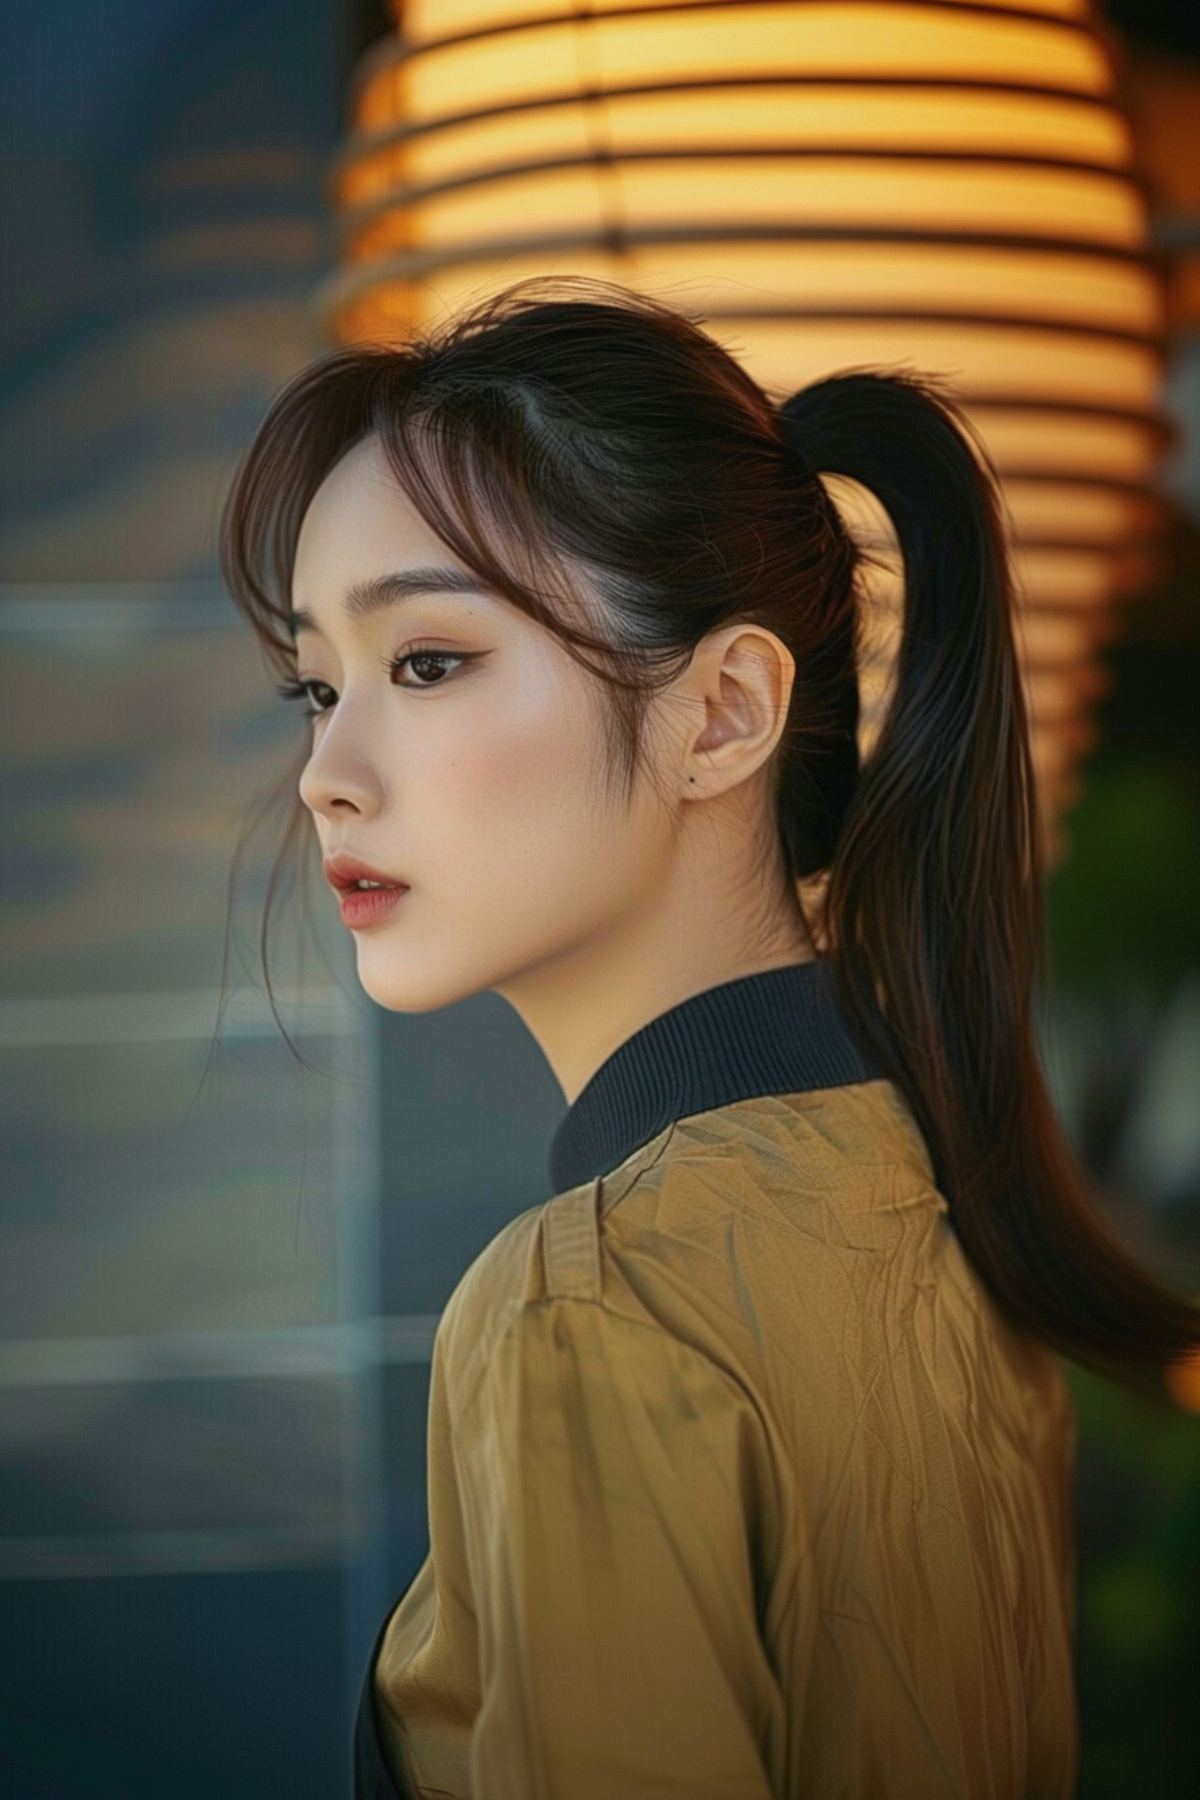 Sleek mid-height ponytail with subtle face-framing pieces, offering a stylish yet practical hairstyle inspired by Korean fashion.